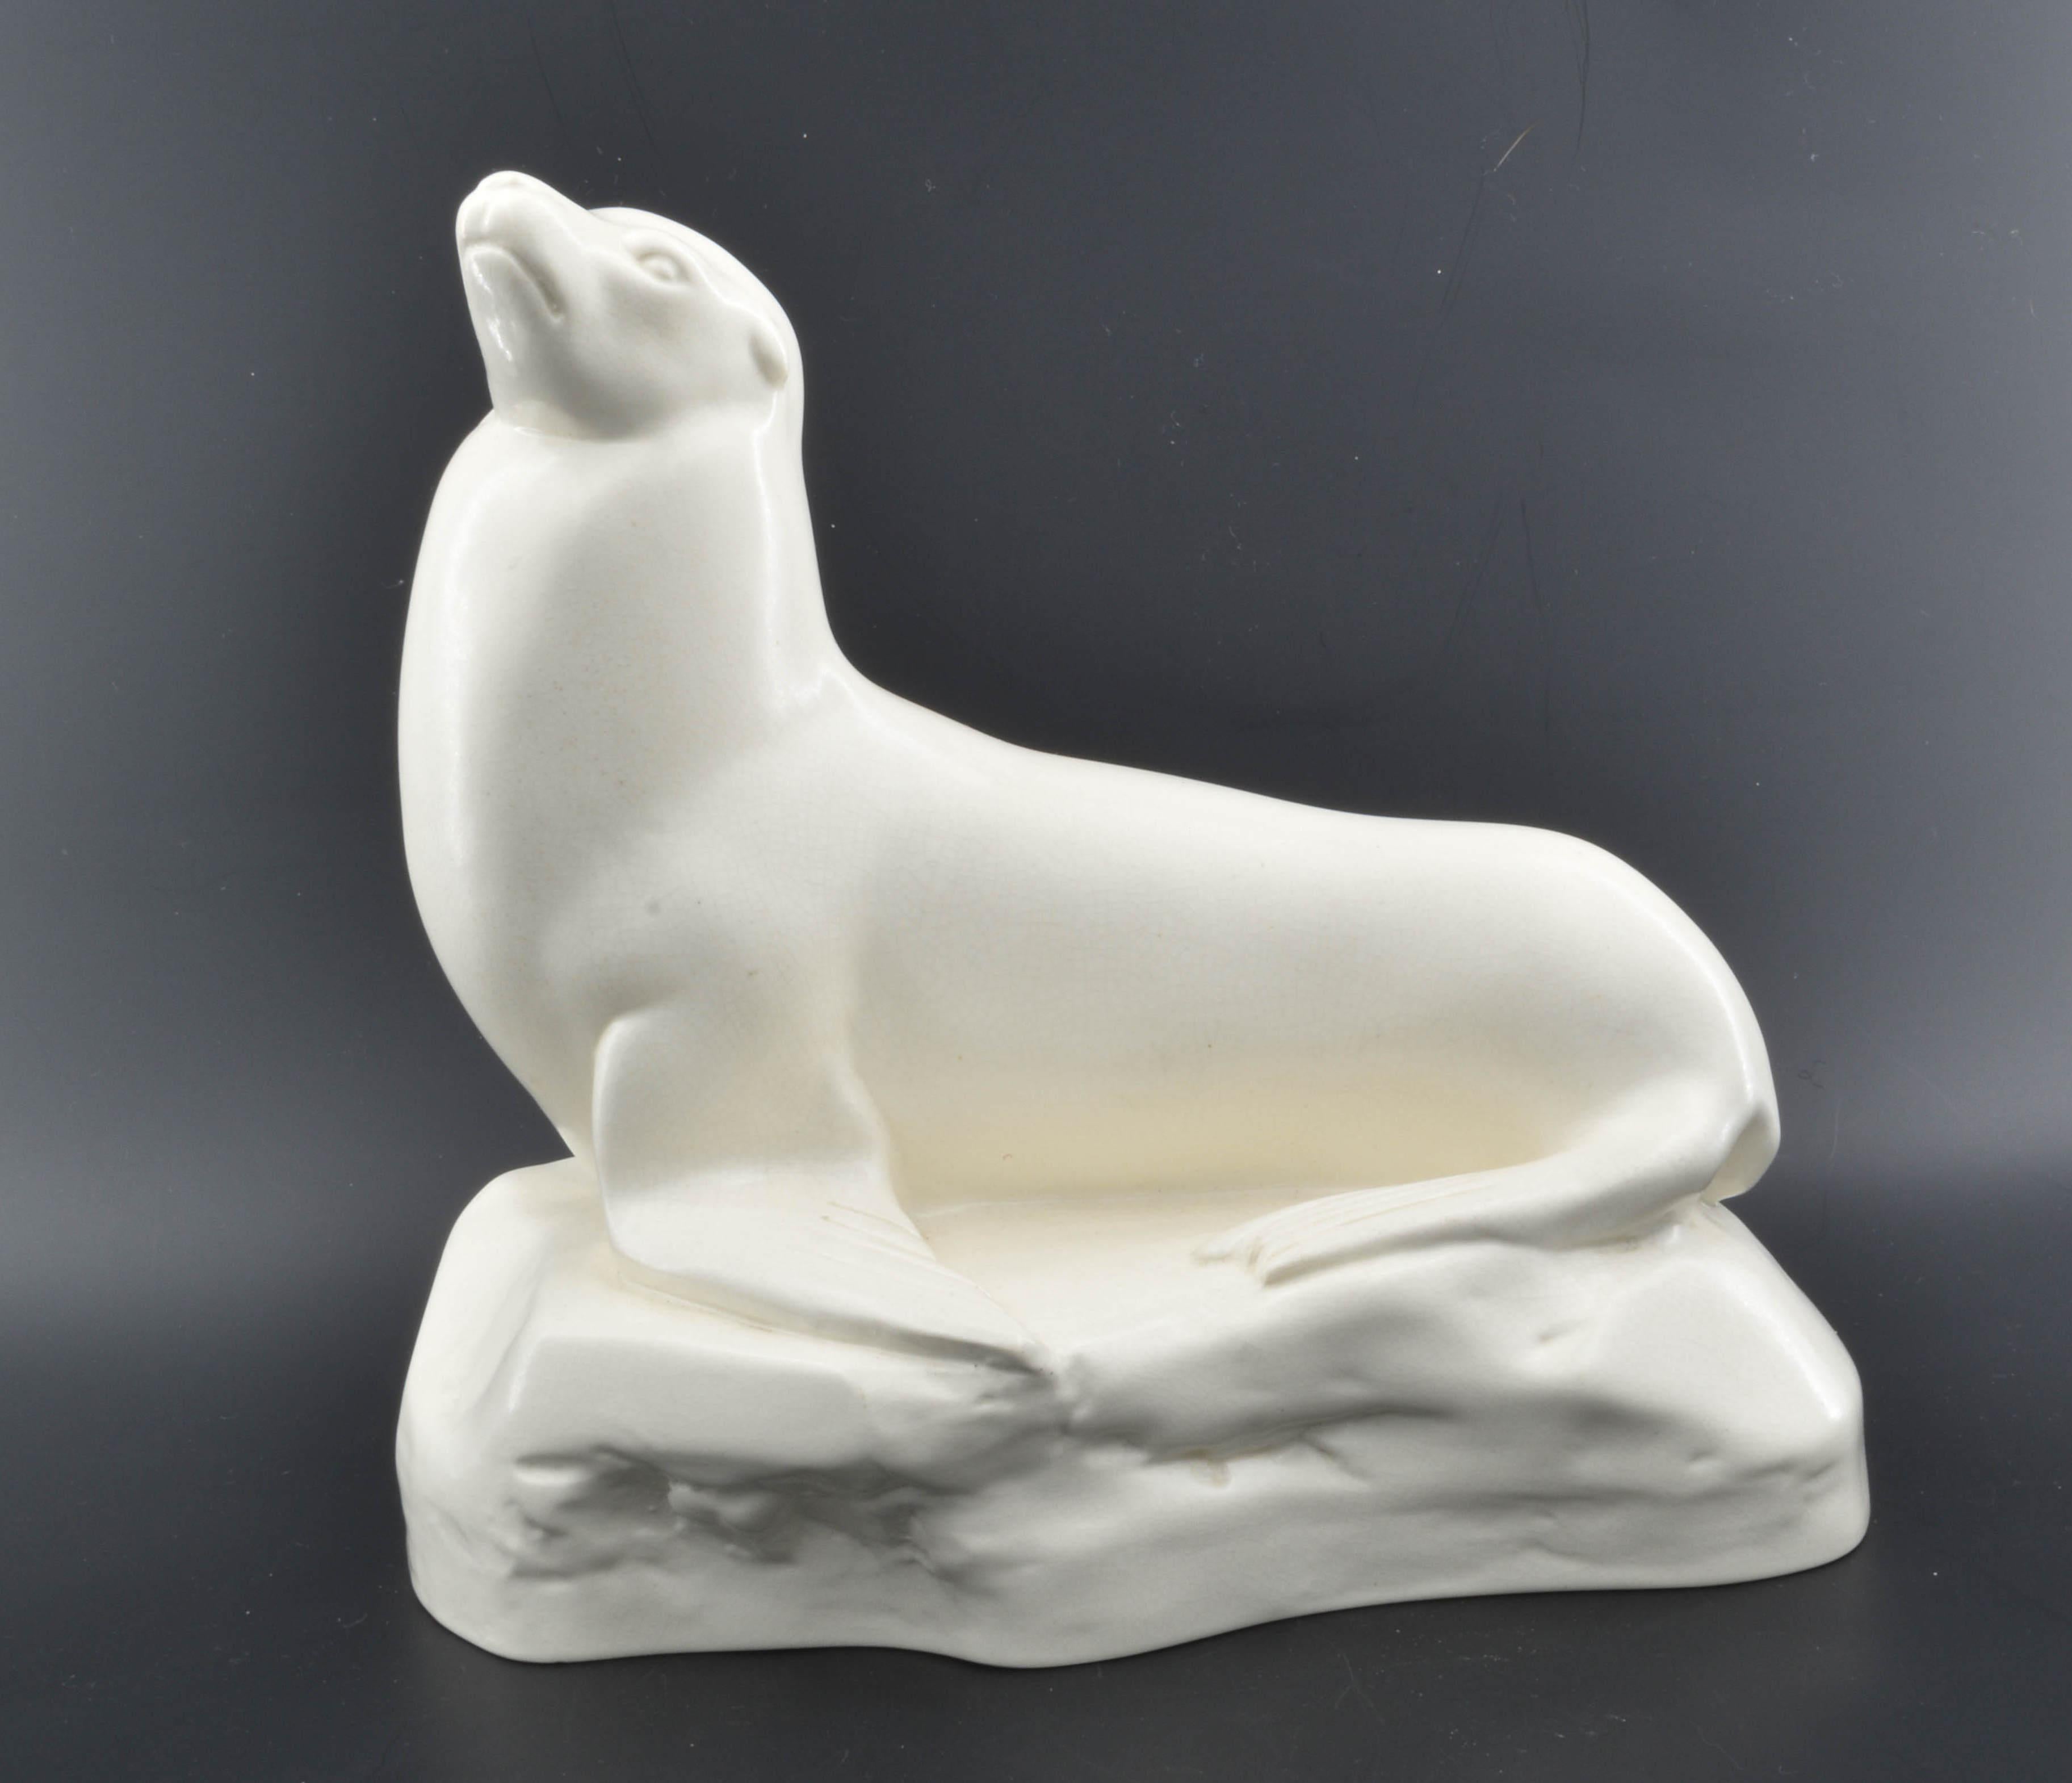 In creamware, with moonstone glaze. The mould sculpted by John Skeaping. Signed for both Wedgwood and Skeaping.

Skeaping was commissioned by Wedgwood to produce a series of animal sculptures in the Art Deco style. They were designed to be simple,